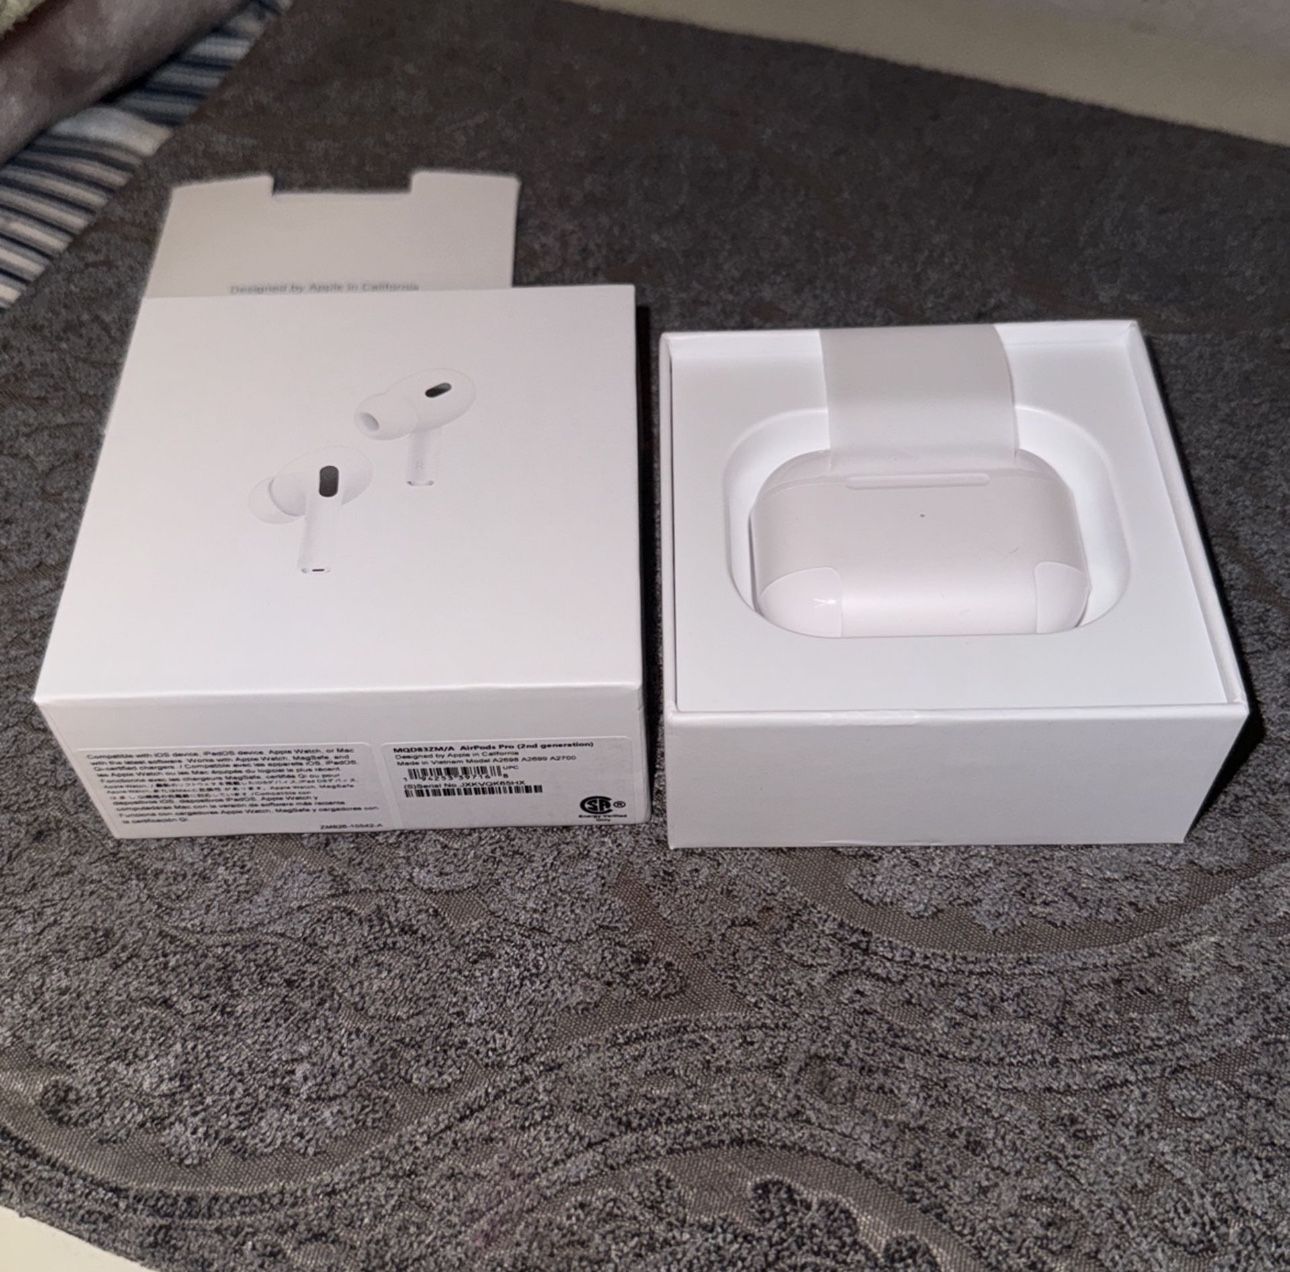 Apple AirPods Pro 2nd Generation Don’t Need No More Have Beats Instead Asking 130$ Or Best Offer